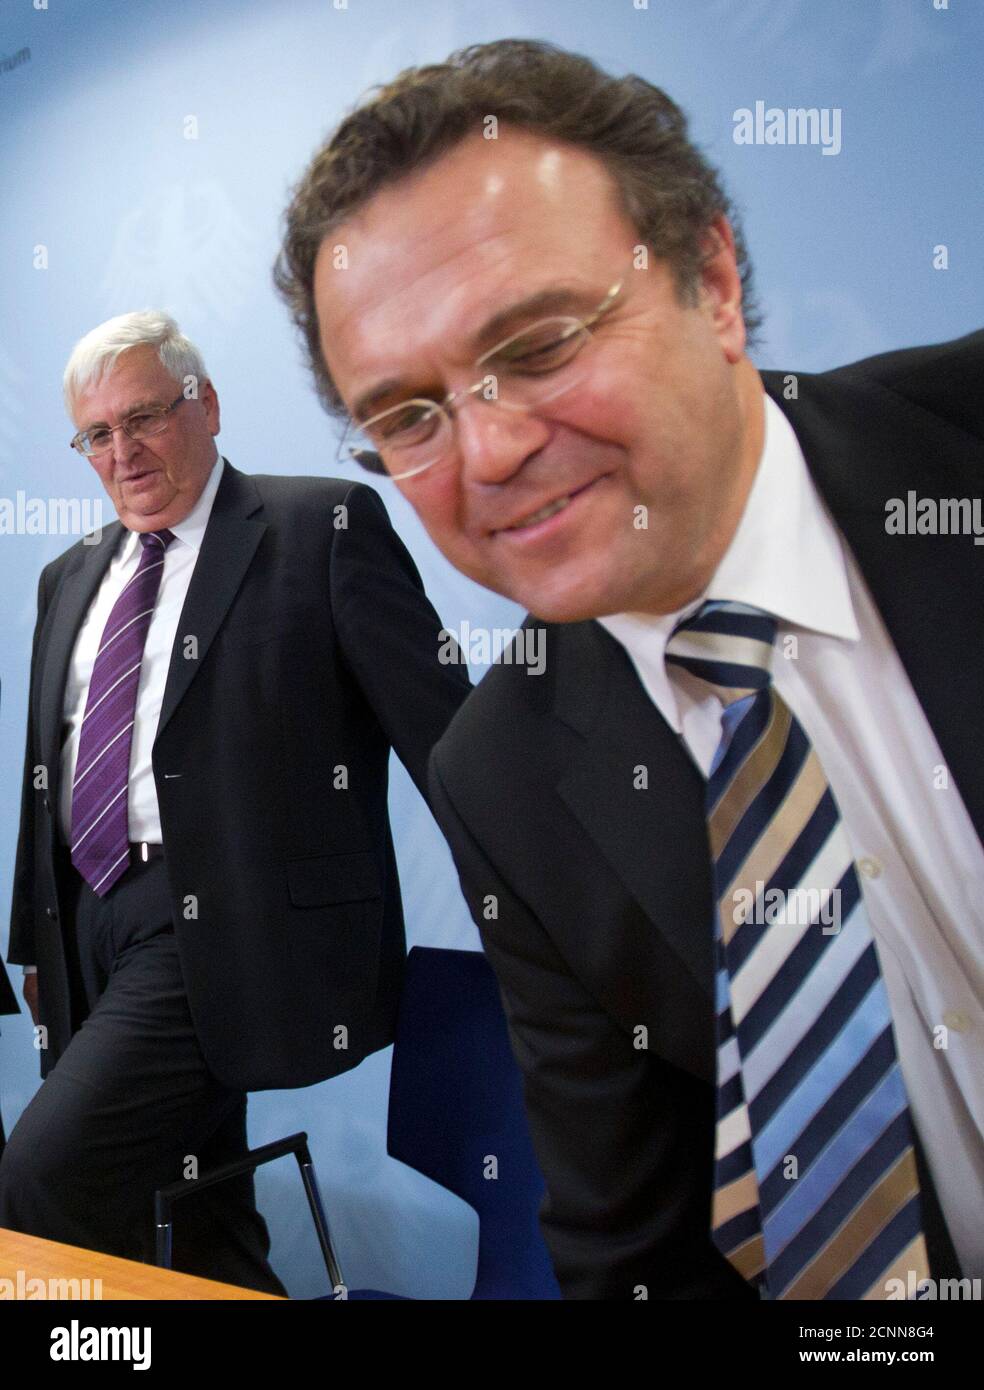 German Interior Minister Hans-Peter Friedrich (R) and President of the German Football Association (DFB),Theo Zwanziger, arrive at a news conference after a round table on violence during and after soccer matches, in Berlin November 14, 2011.  REUTERS/Thomas Peter (GERMANY - Tags: POLITICS SPORT SOCCER) Stock Photo